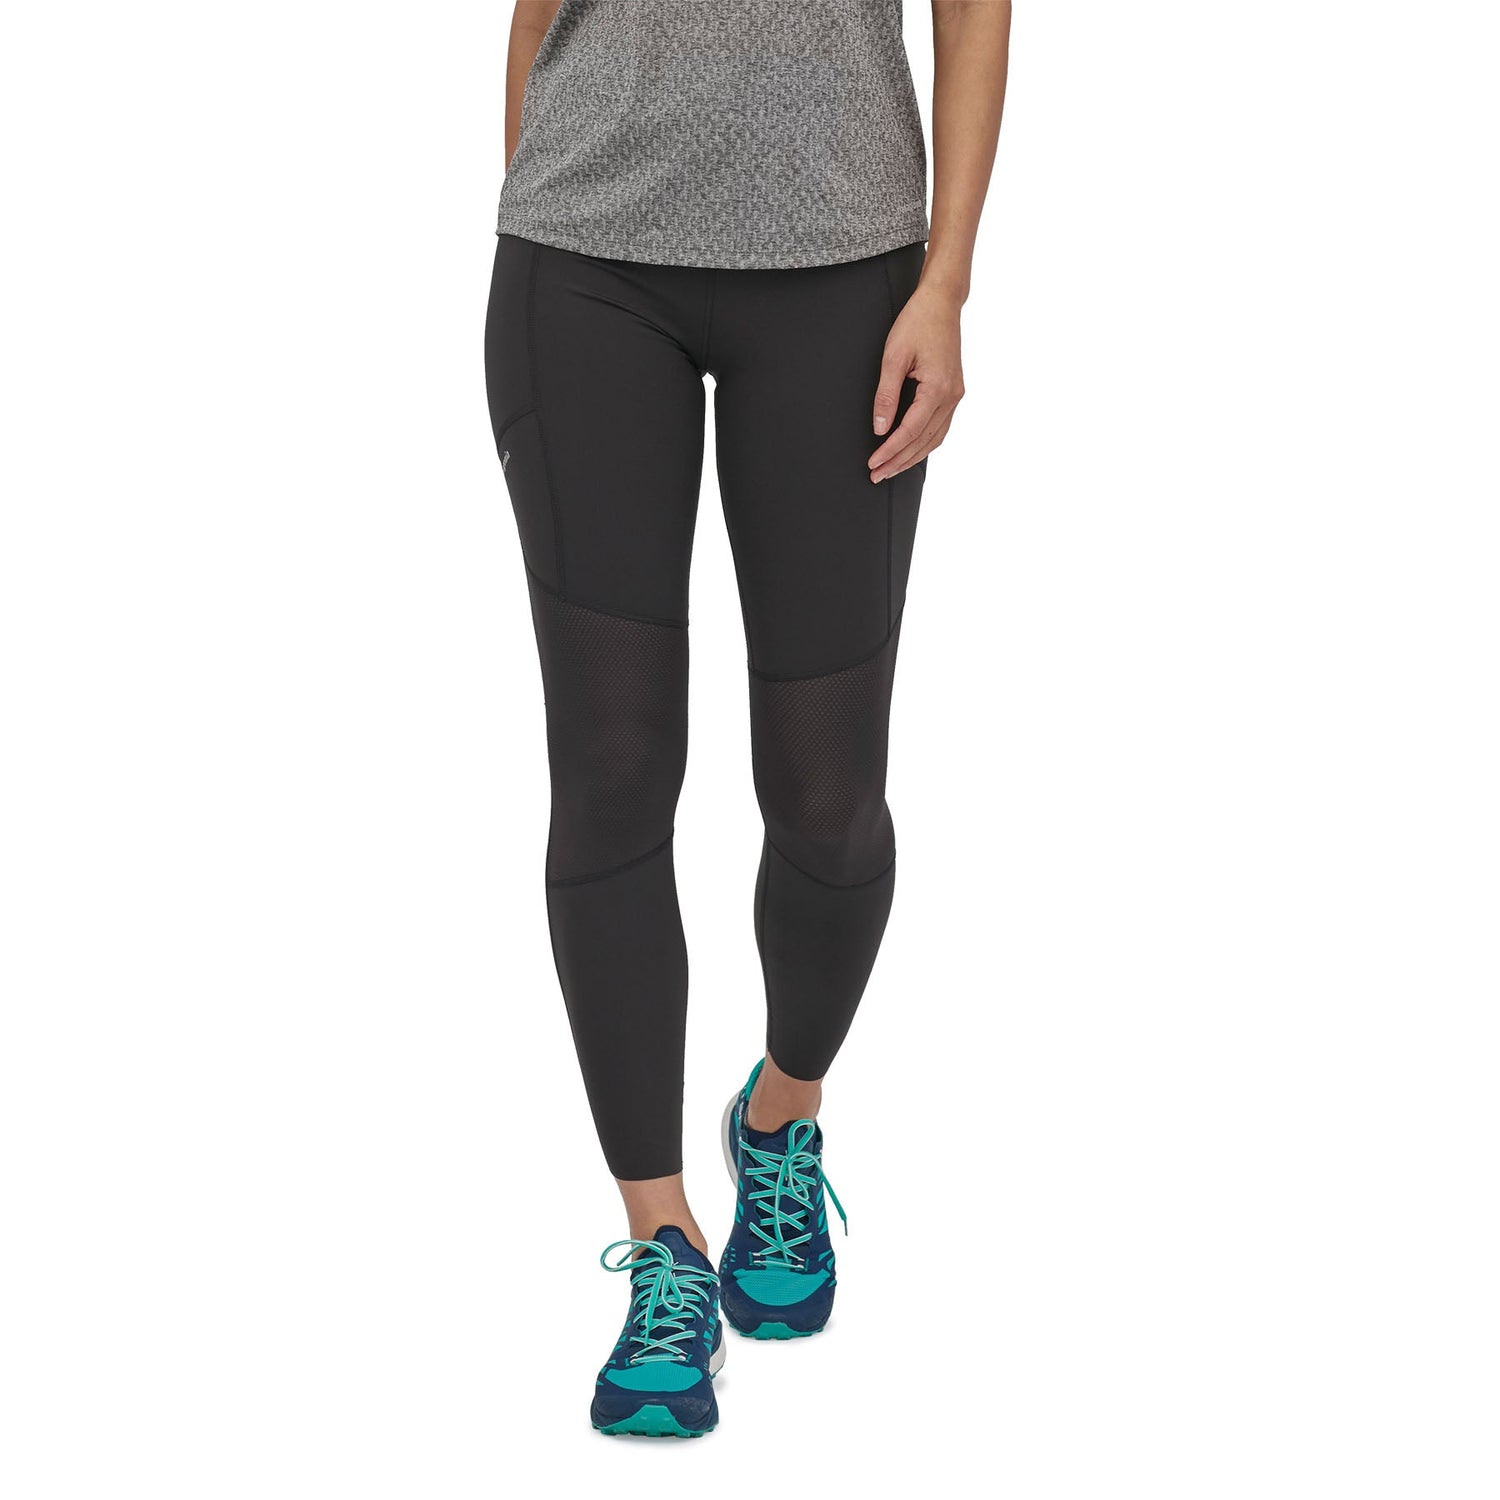 Patagonia - W's Endless Run 7/8 Tights - Recycled nylon - Weekendbee - sustainable sportswear